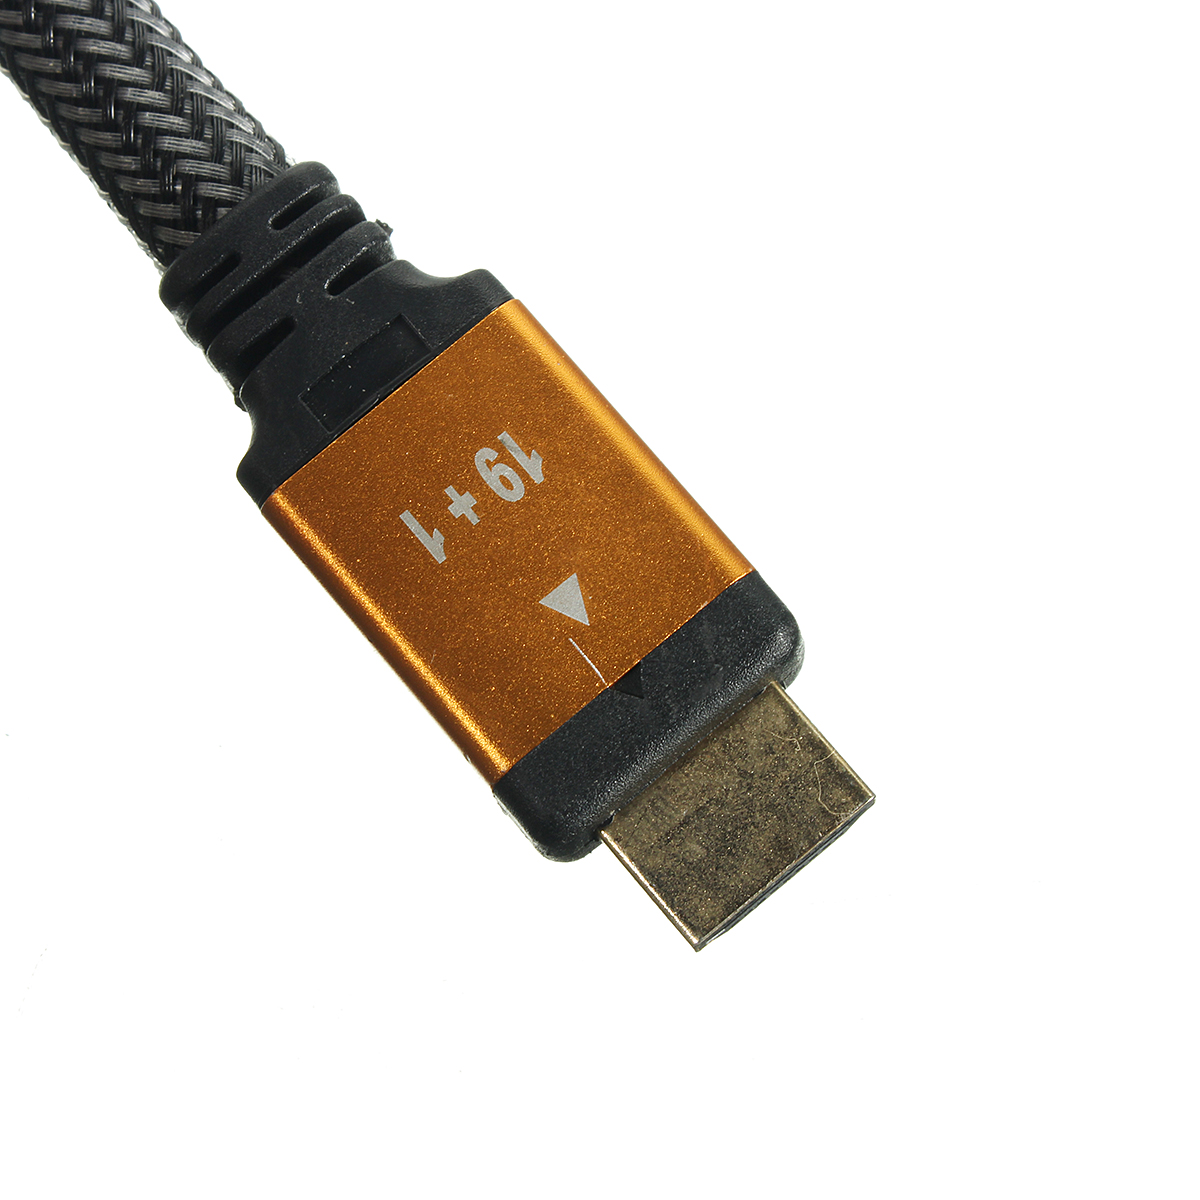 15M-3D-Orange-HD-Cable-Lead-V20-Gold-High-Speed-for-HDTV-Ultra-Hd-HD-2160p-4K-1131620-5